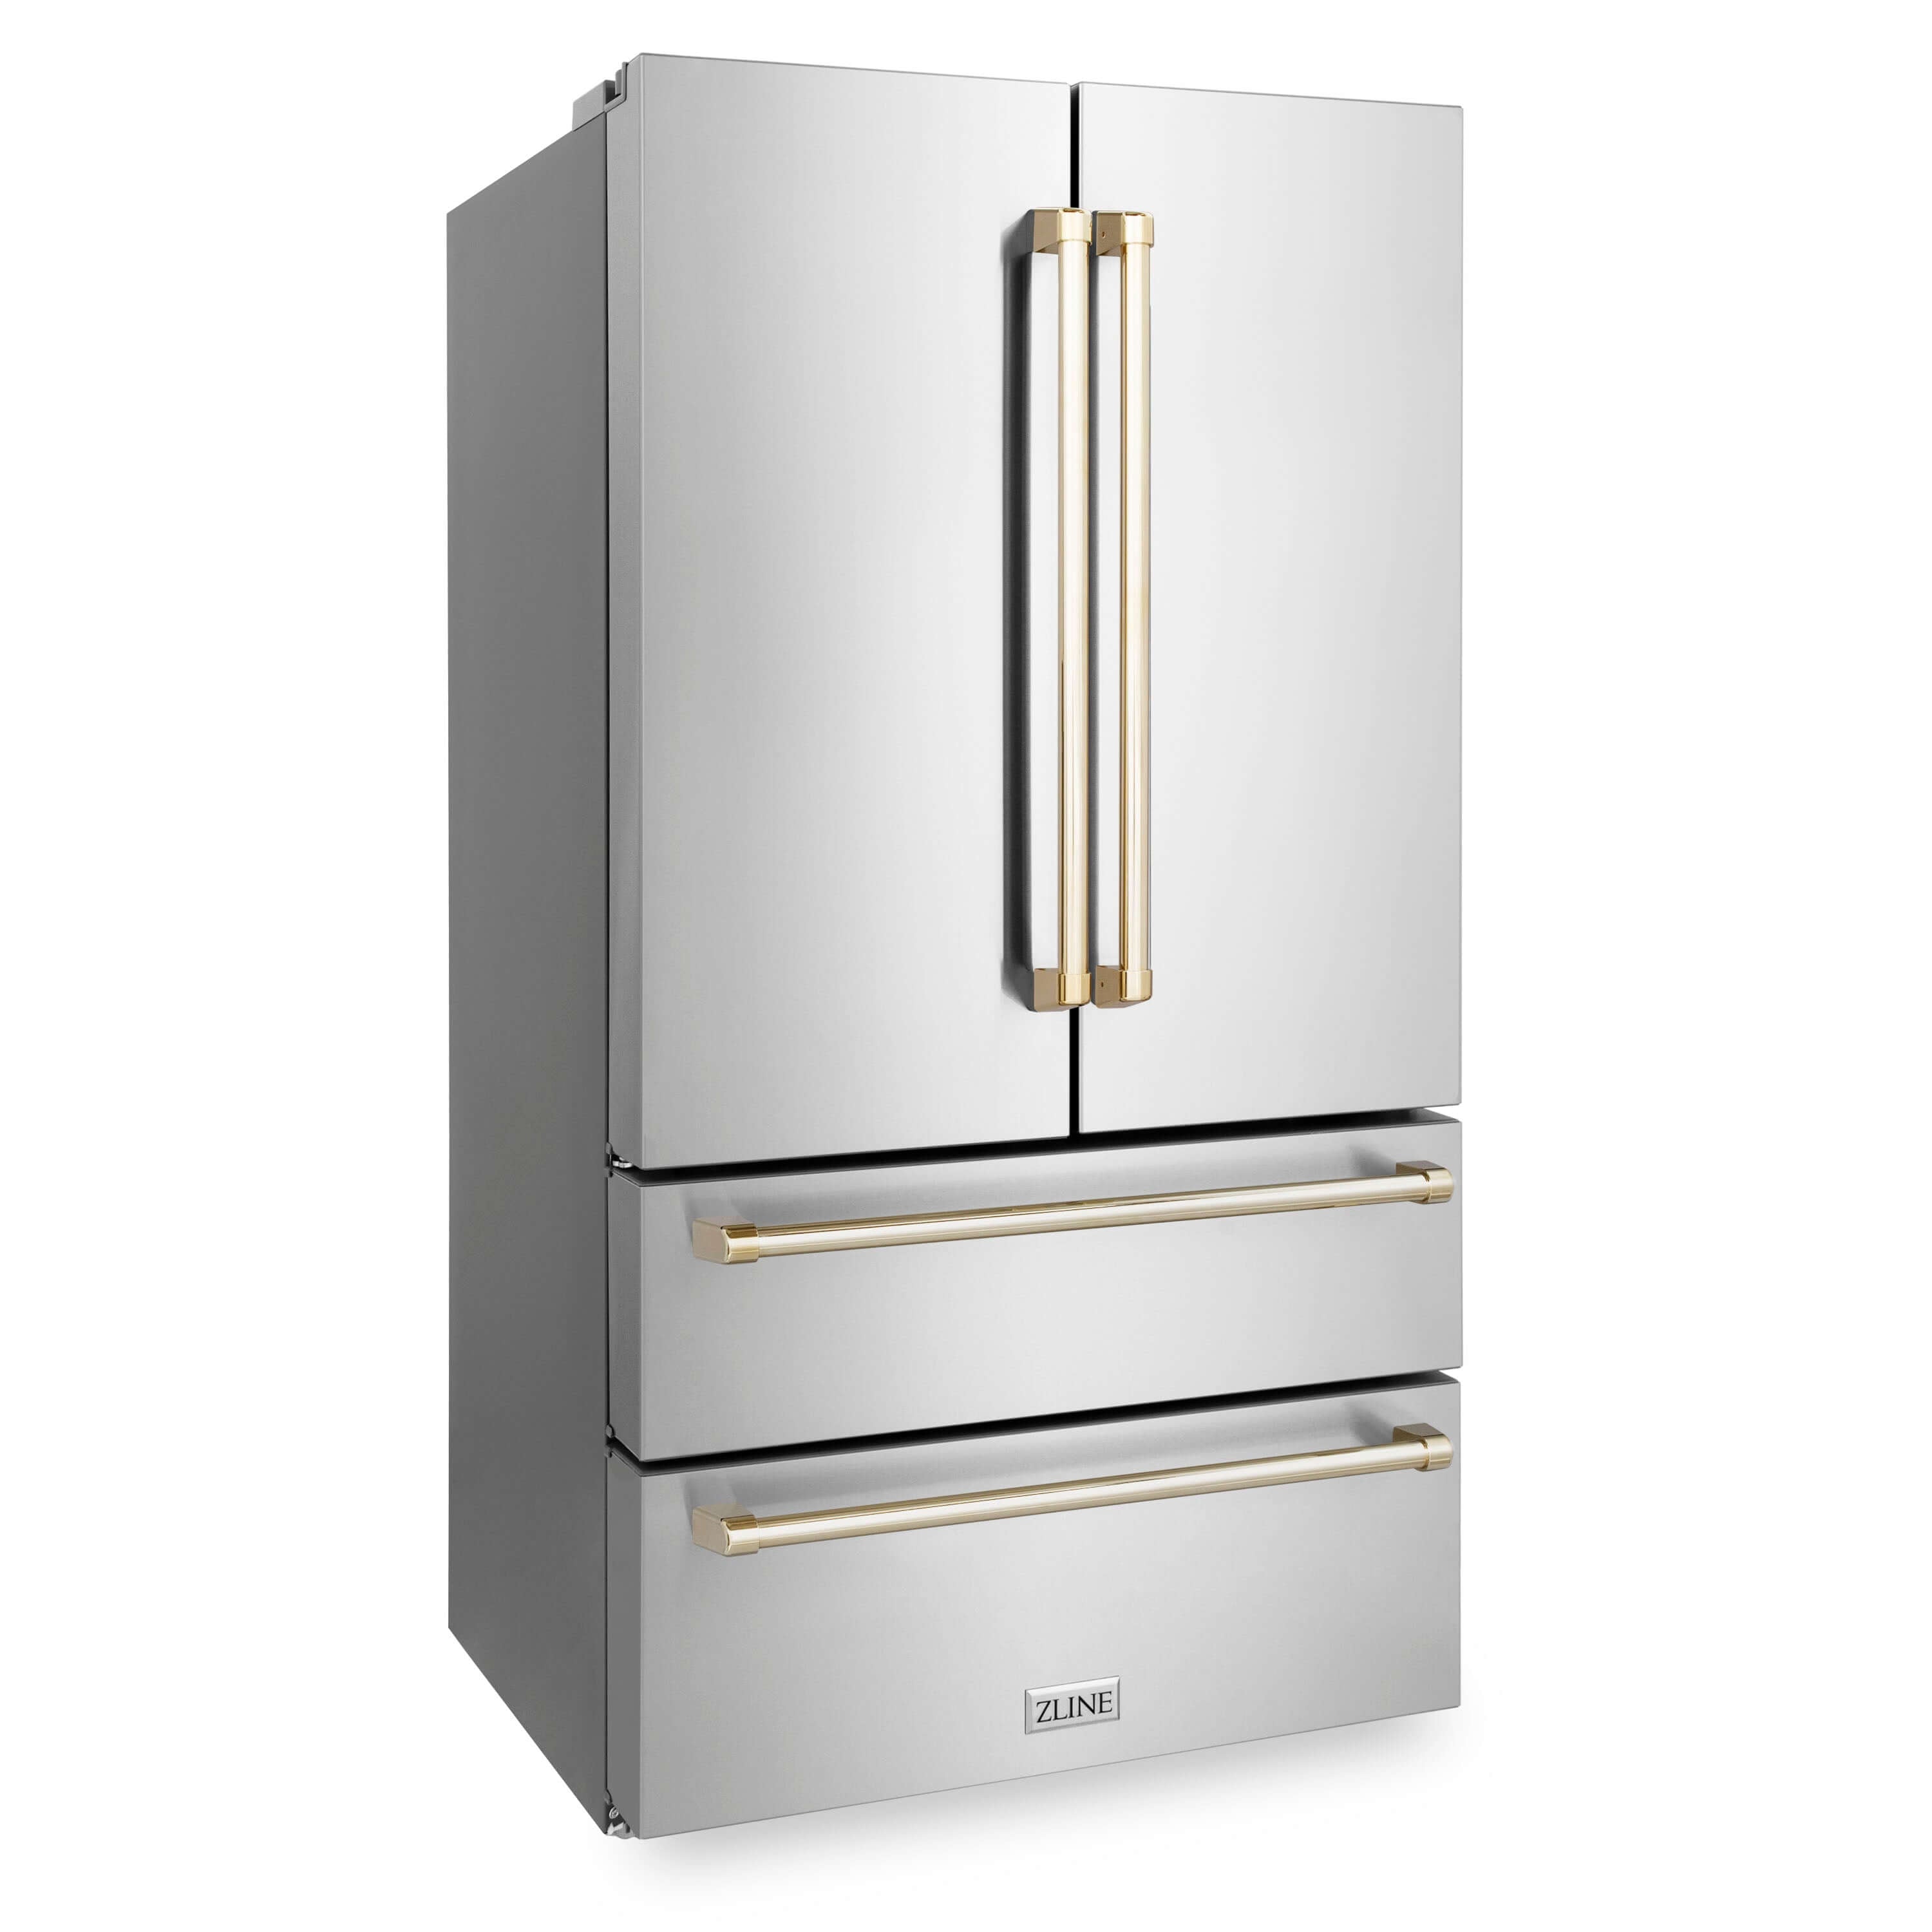 ZLINE Autograph Edition 36 in. 22.5 cu. ft Freestanding French Door Refrigerator with Ice Maker in Fingerprint Resistant Stainless Steel with Polished Gold Accents (RFMZ-36-G) side, closed.